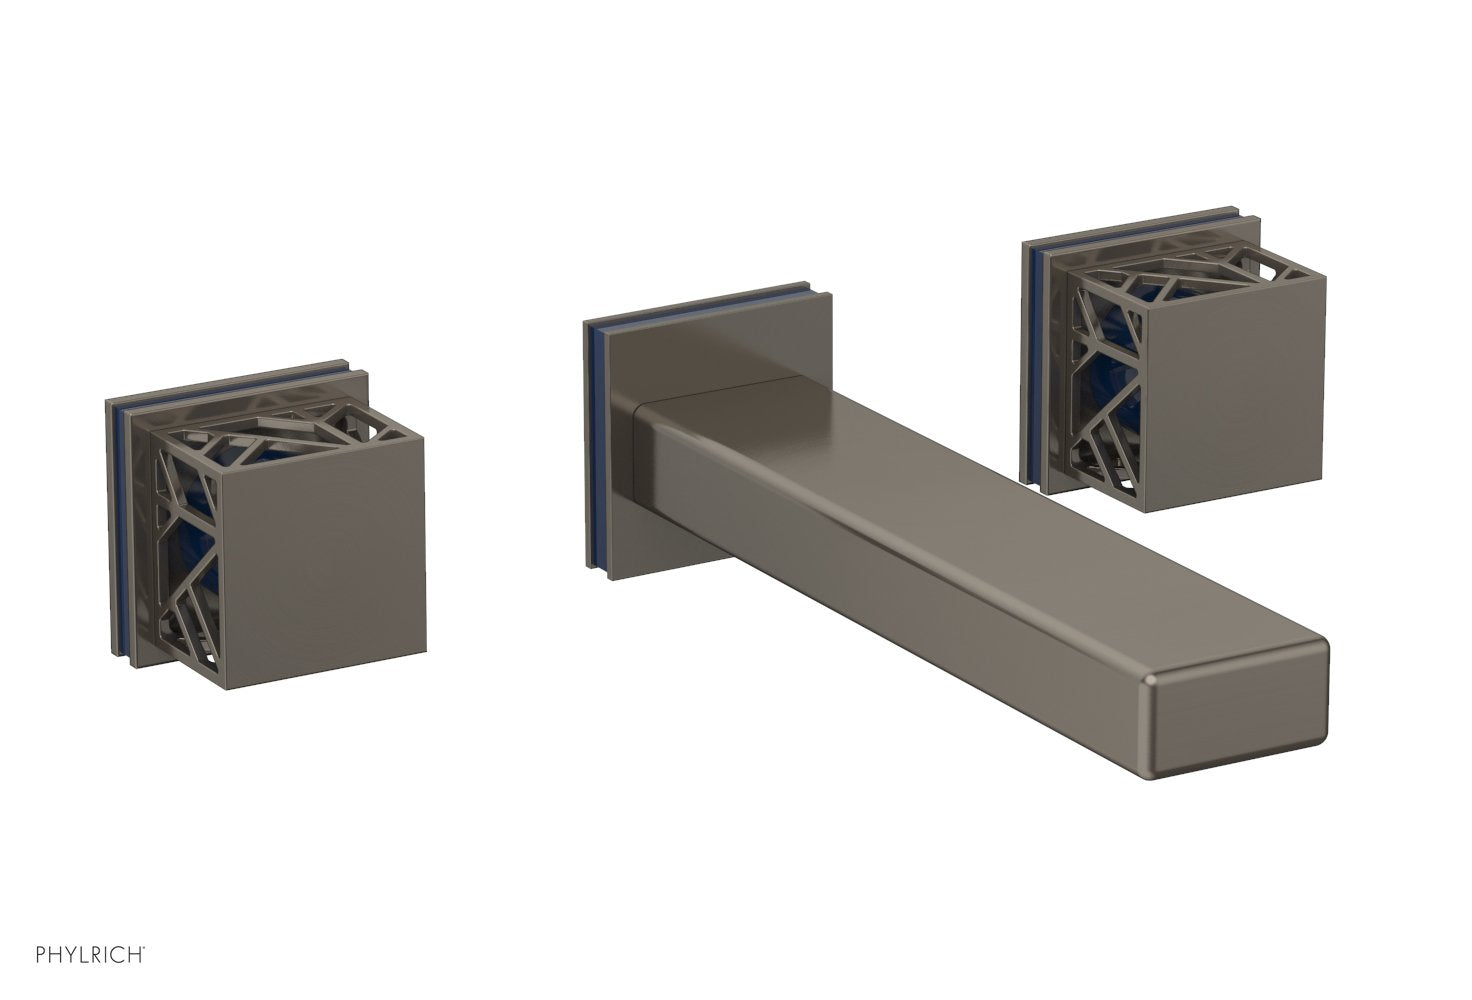 Phylrich JOLIE Wall Lavatory Set - Square Handles with "Navy blue" Accents